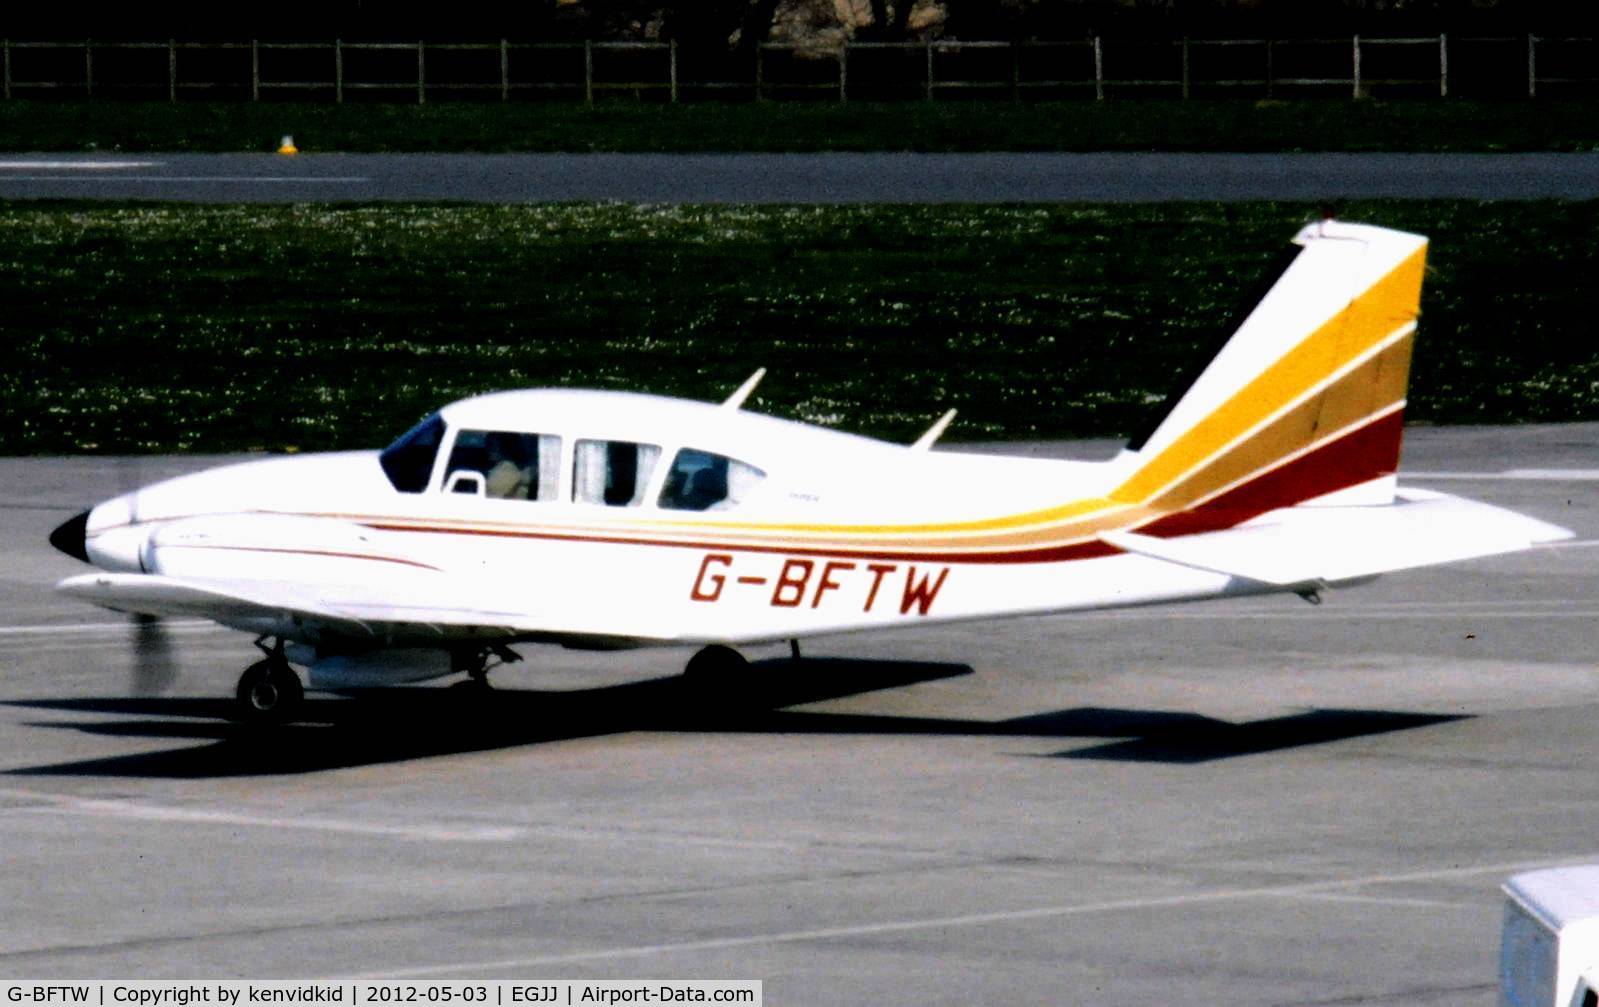 G-BFTW, 1978 Piper PA-23-250 Aztec C/N 27-7854087, At Jersey airport early 1970's.
Scanned from slide.